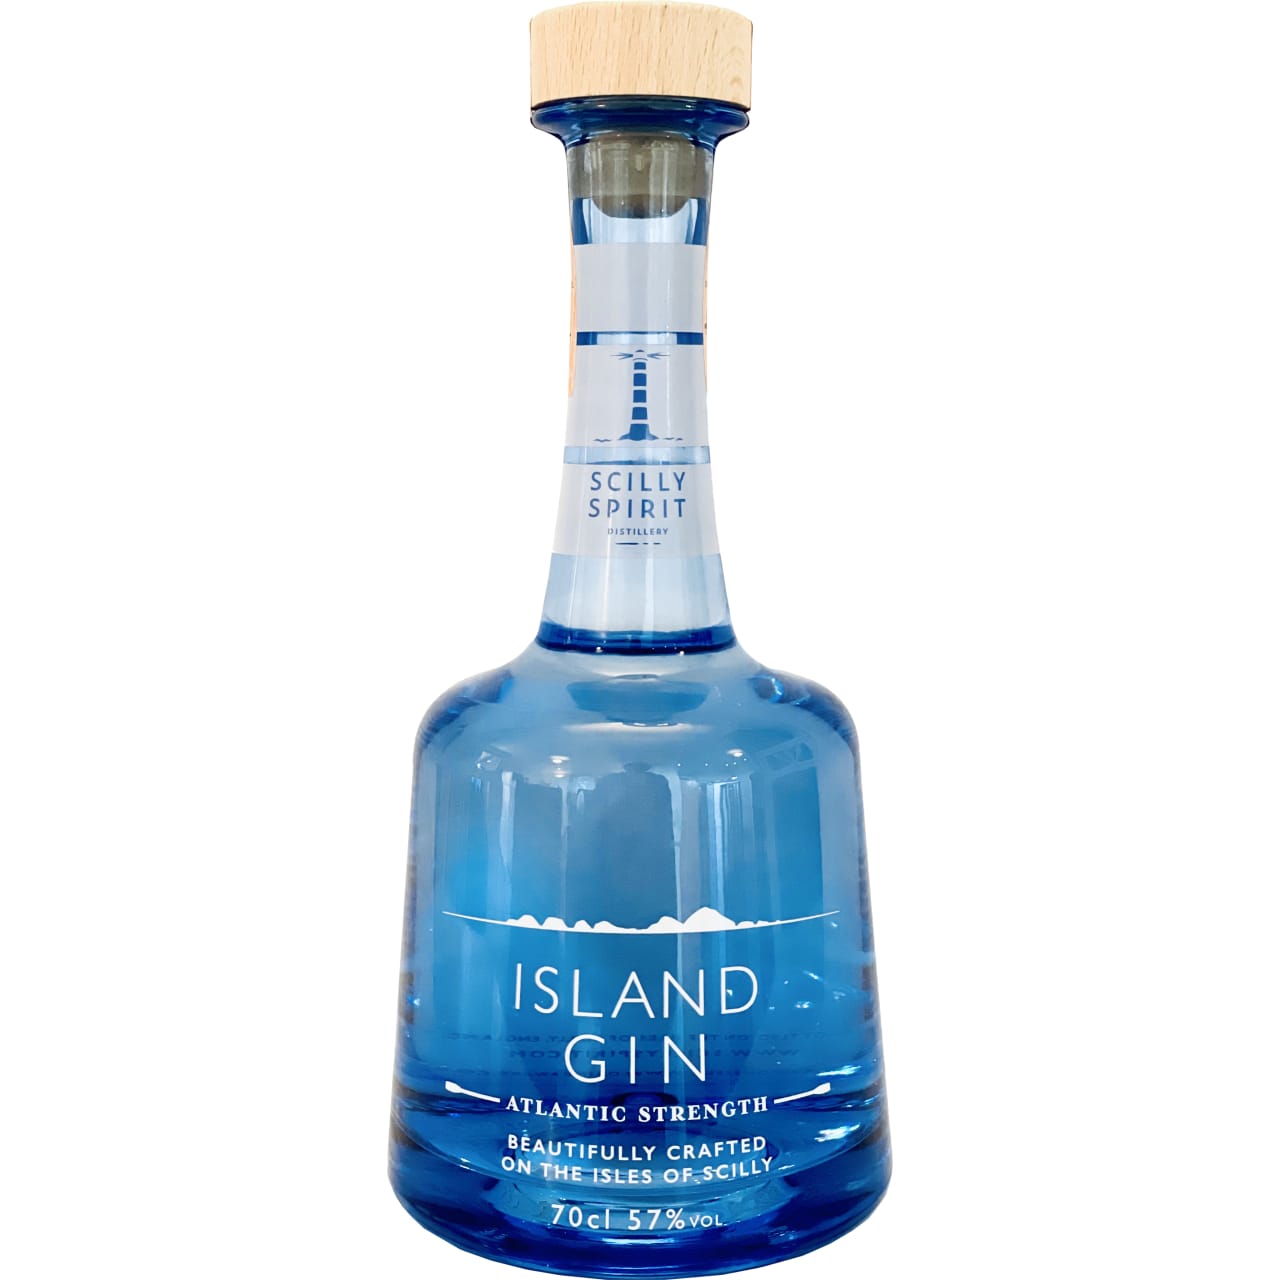 This top gin is made on the Isles of Scilly just off the Cornish coast, with sustainability being a focus for the distillery - they compost used botanicals, and encourage folks to reuse the bottles the gin comes in.